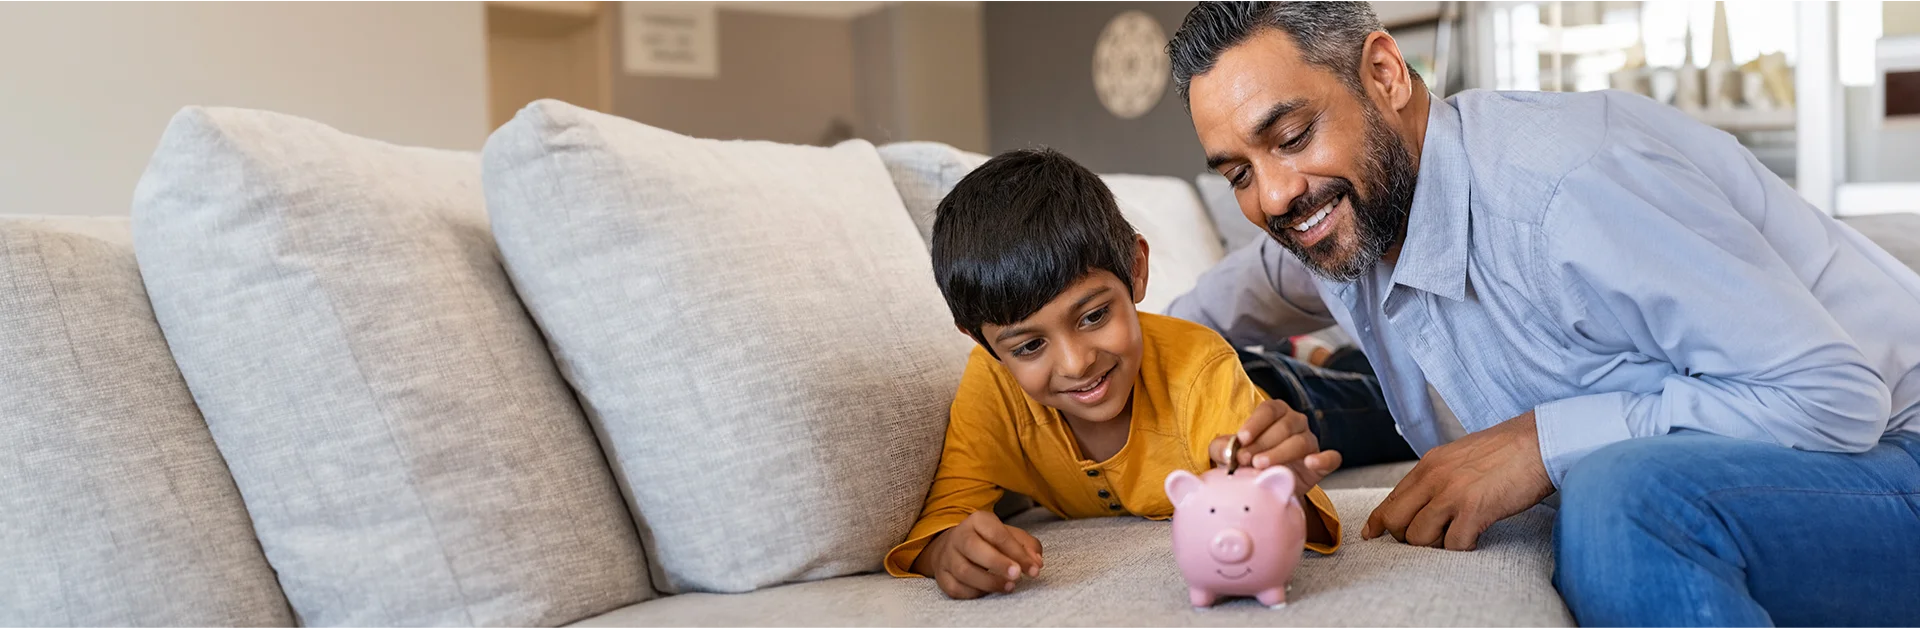 Man and son lying on couch putting coin into piggy bank